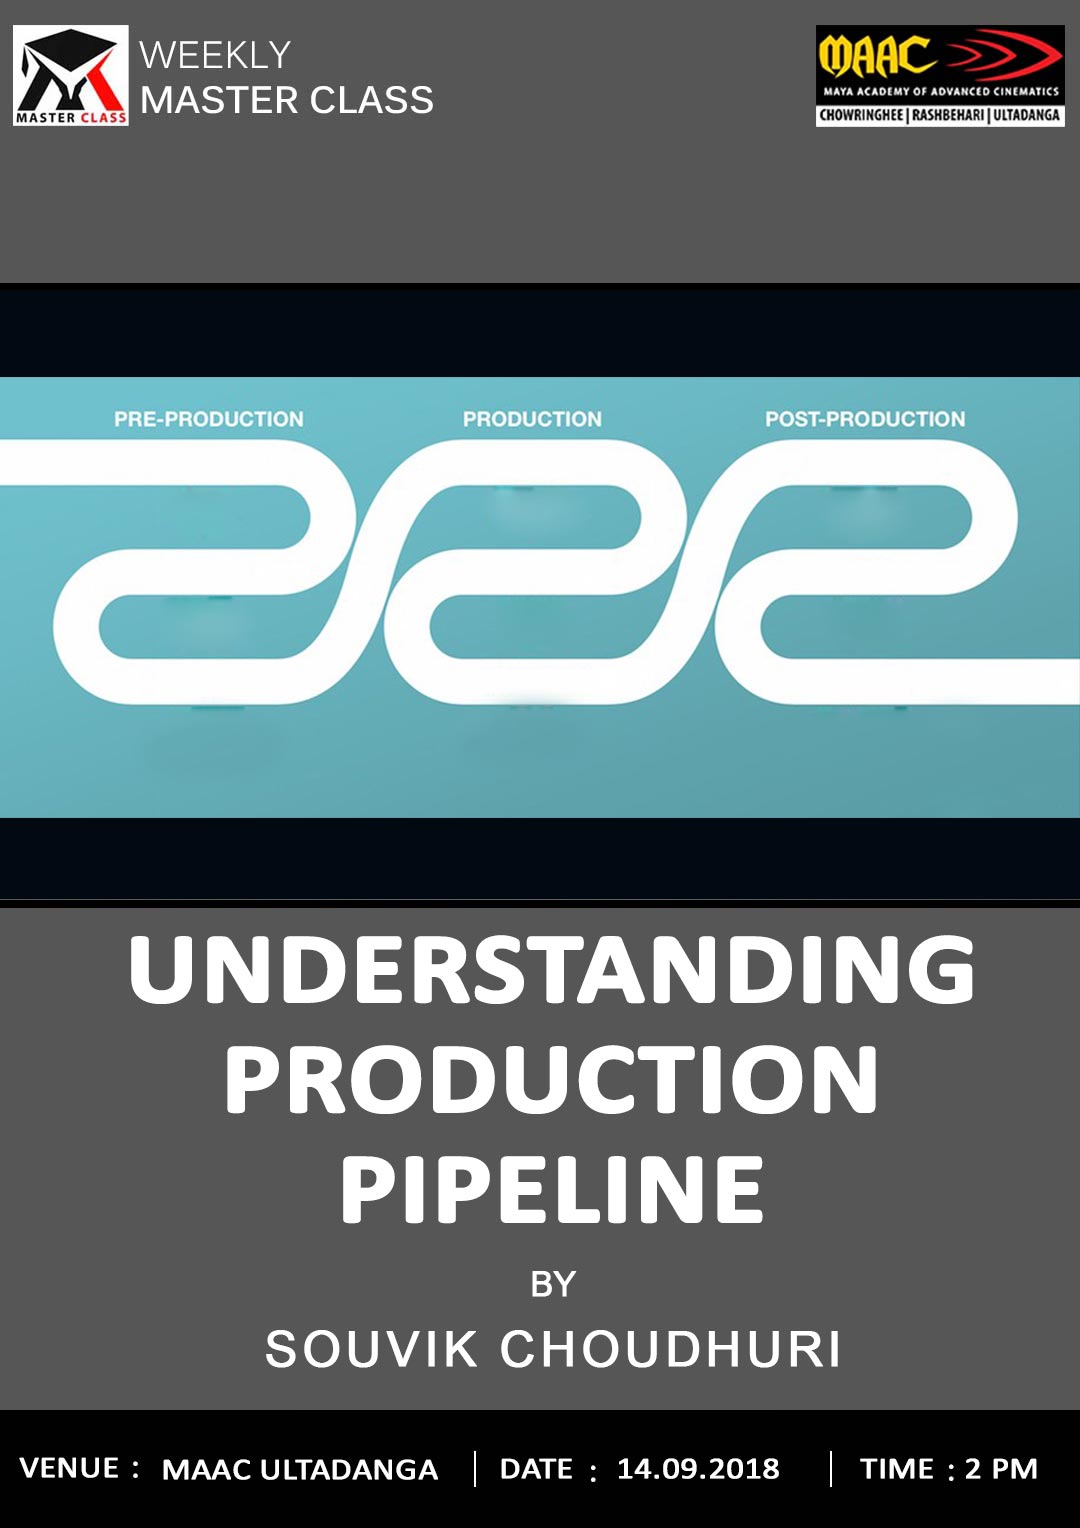 Weekly Master Class on UNDERSTANDING PRODUCTION PIPELINE